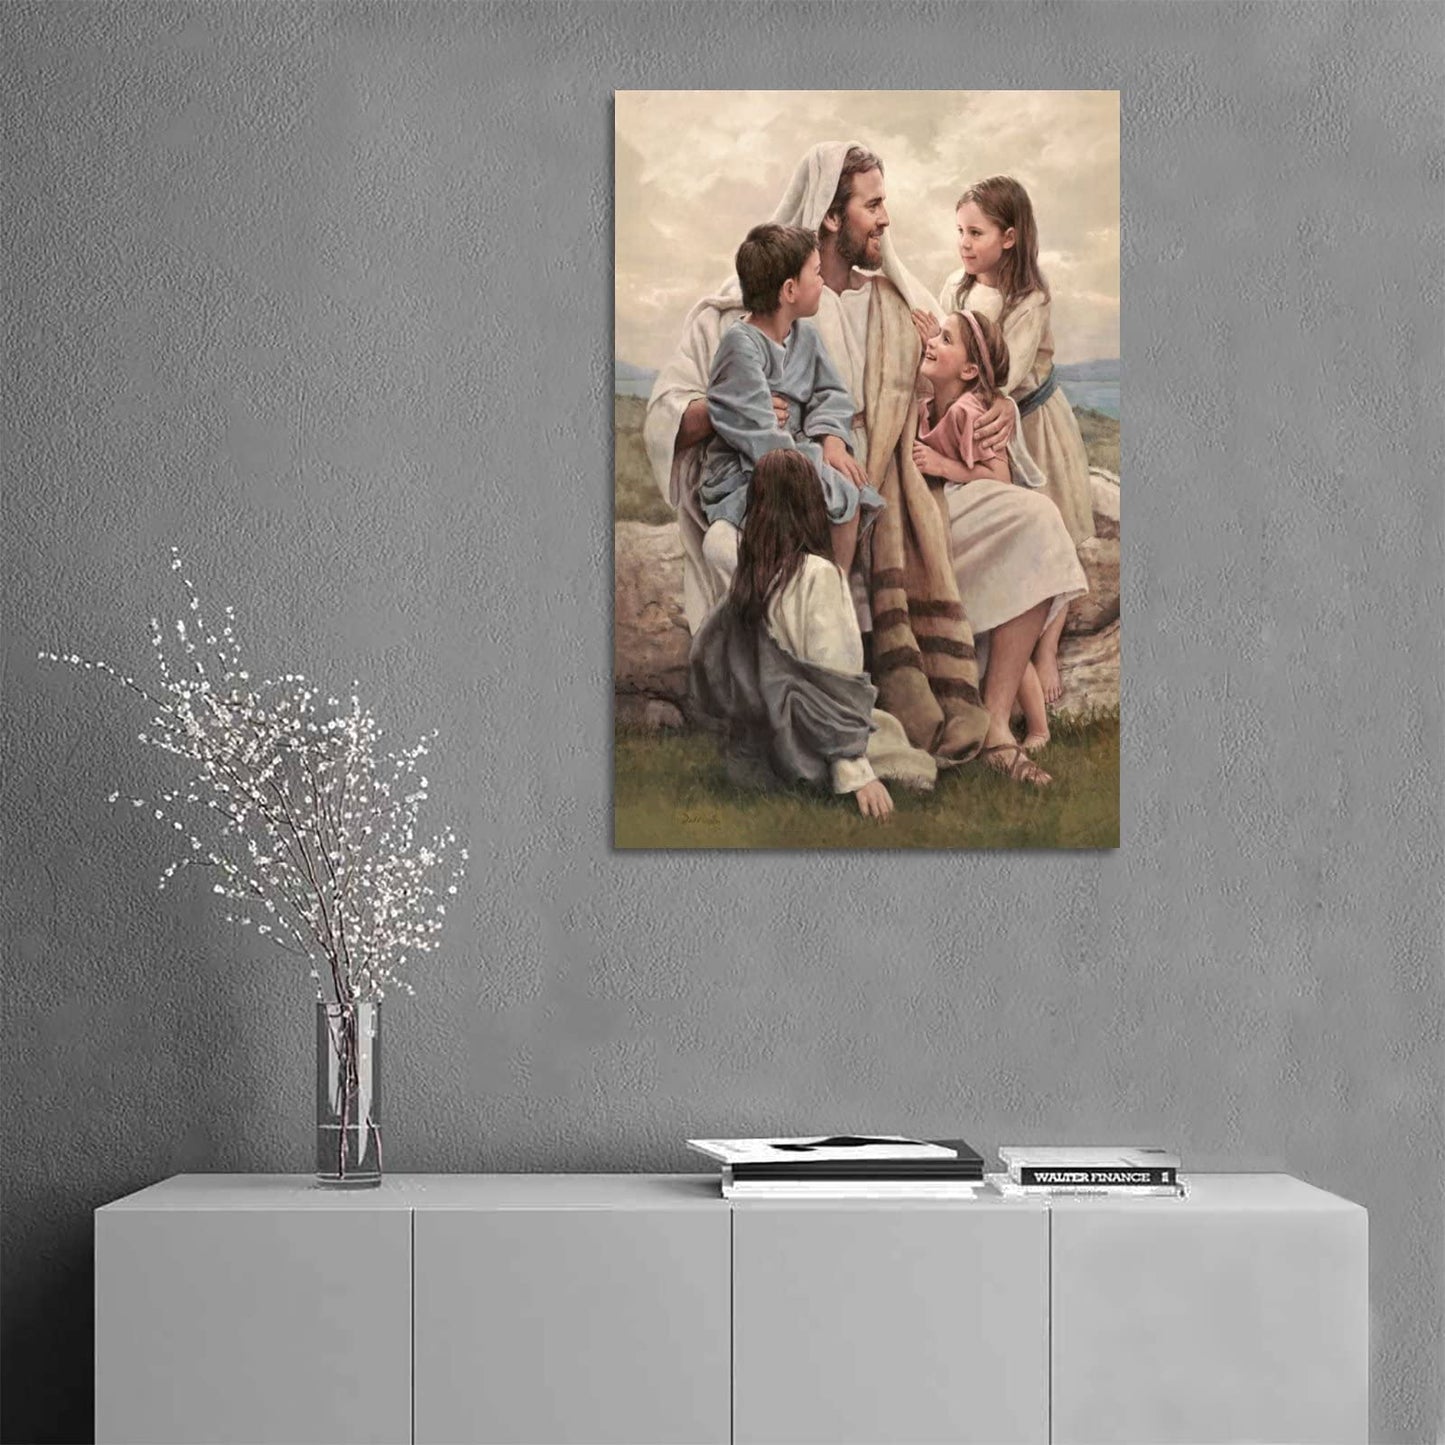 ZTJ Jesus Blesses The Children Canvas Art Poster and Wall Art Picture Print Modern Family Bedroom Decor Posters 08x12inch(20x30cm)